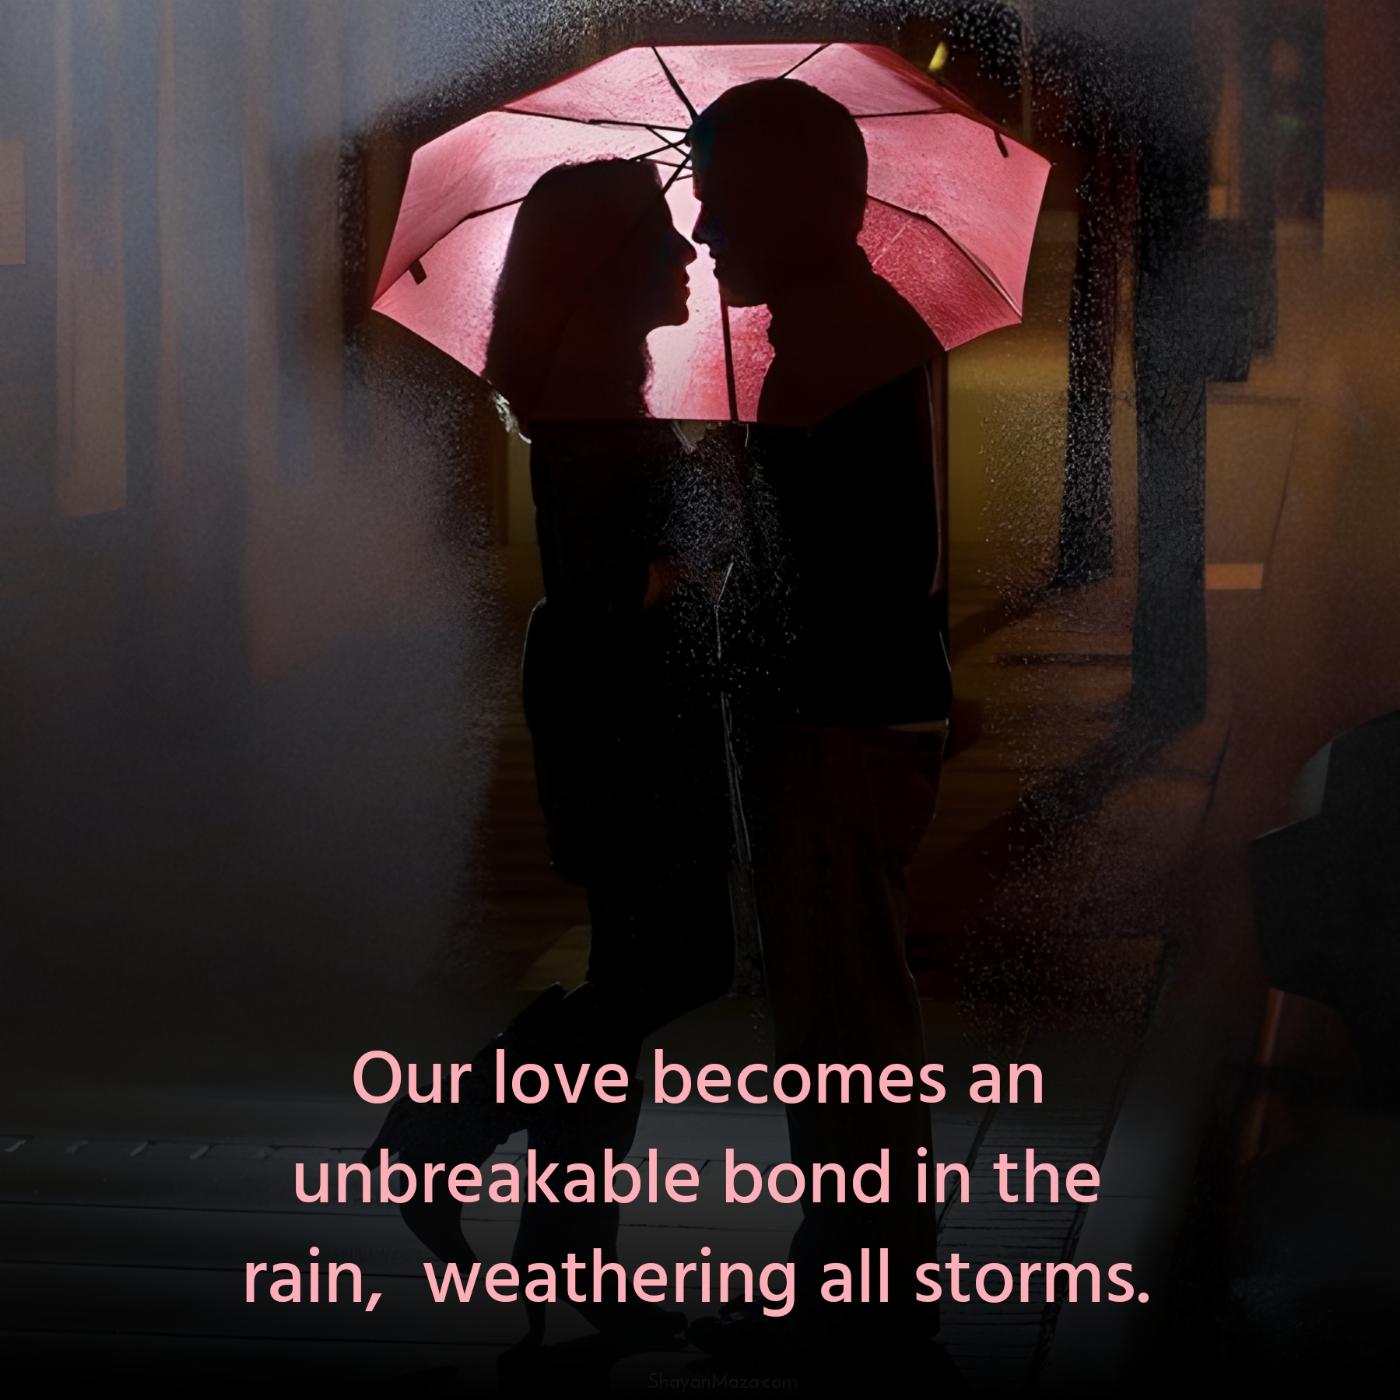 Our love becomes an unbreakable bond in the rain